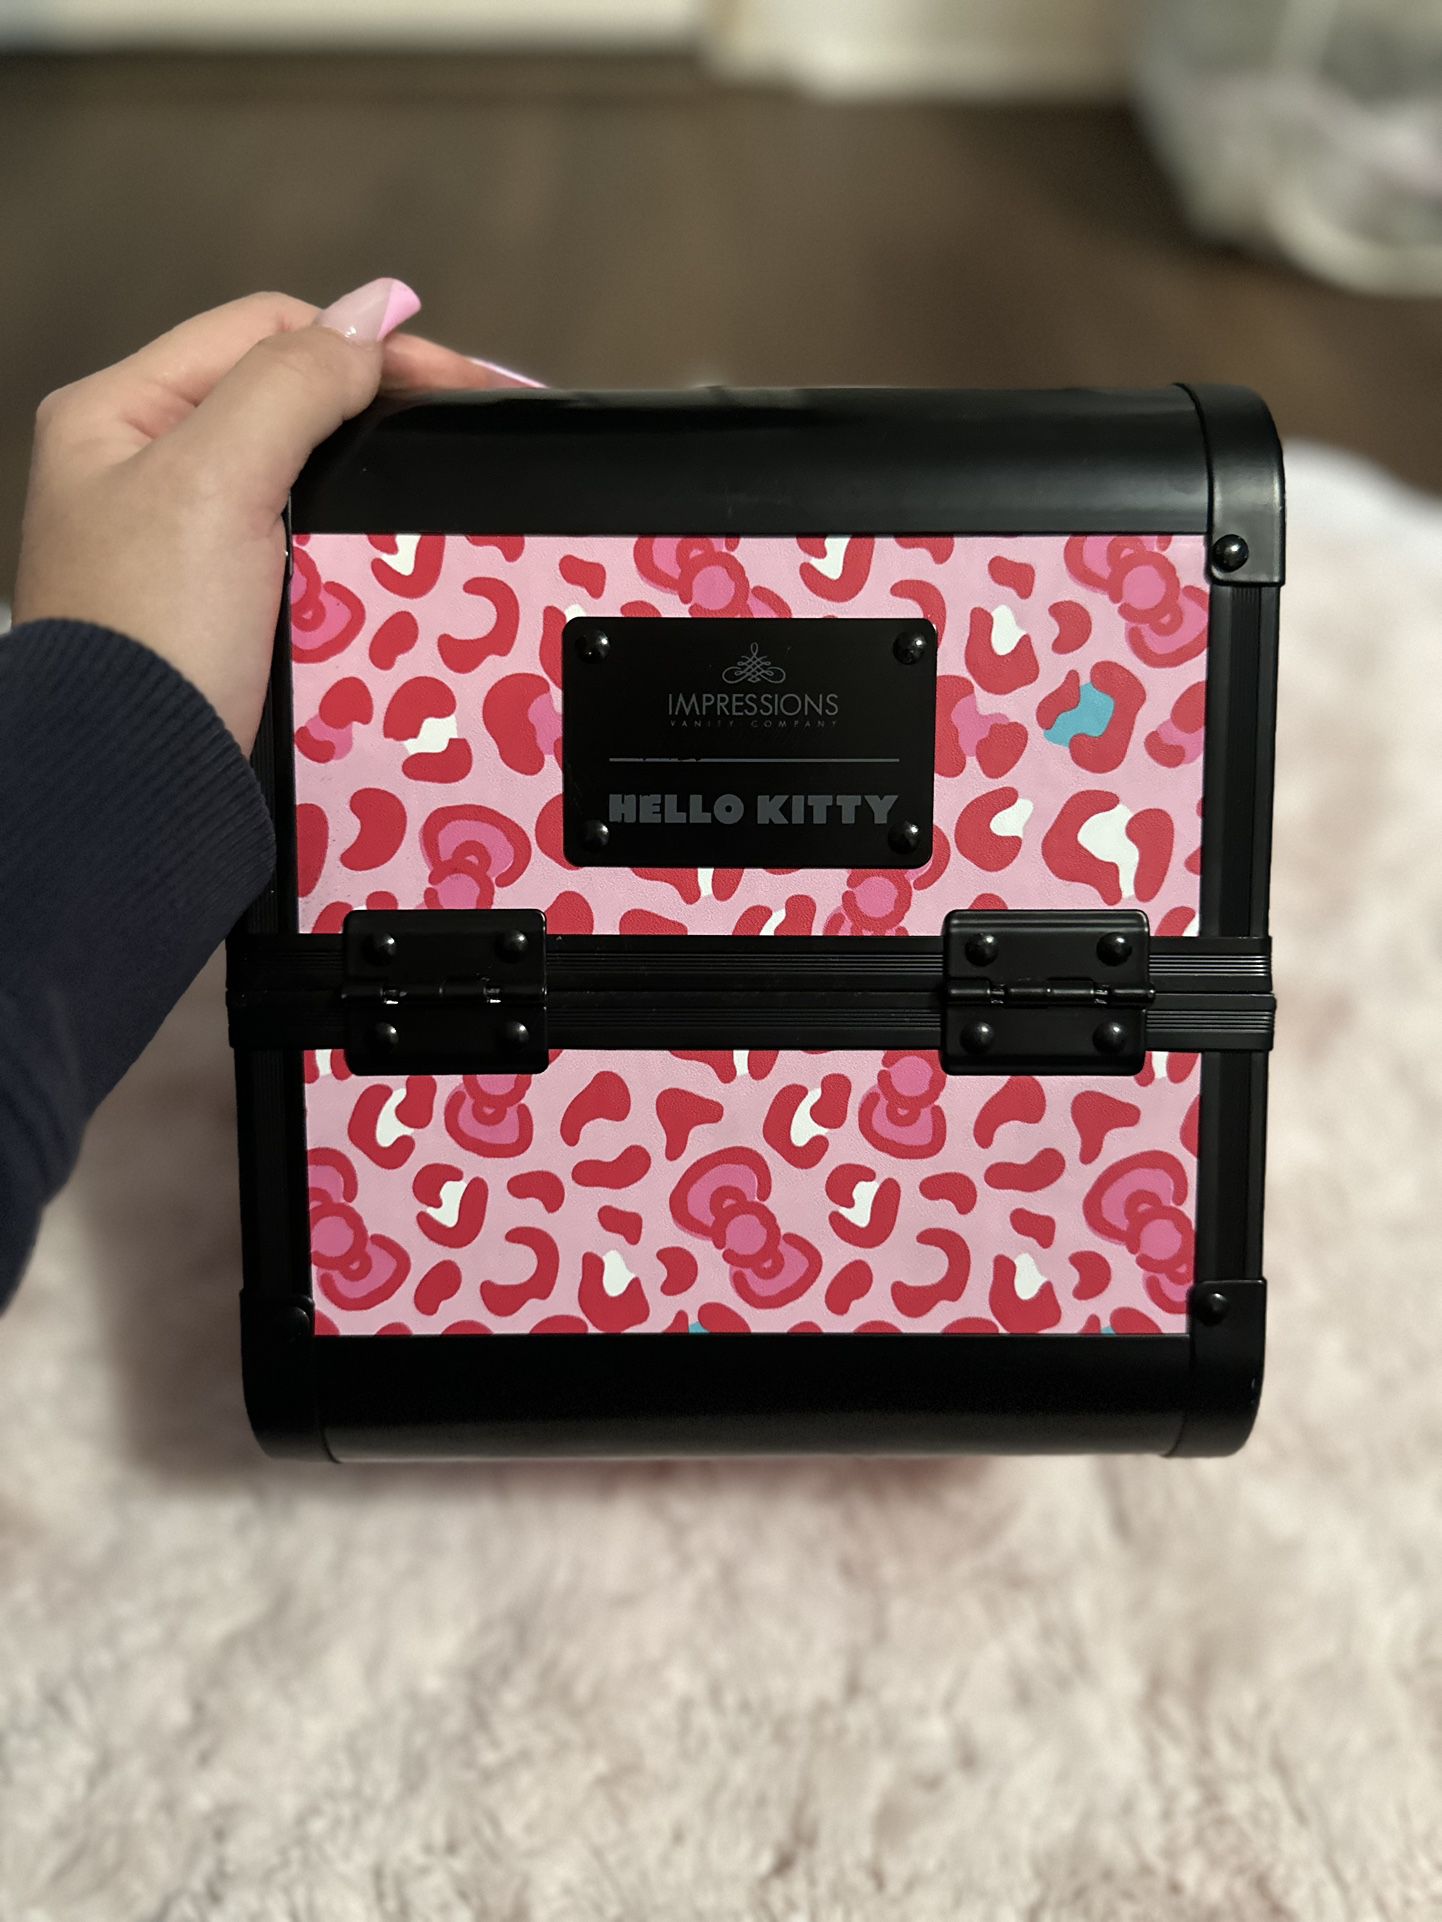 Impressions X Hello Kitty Makeup chest 